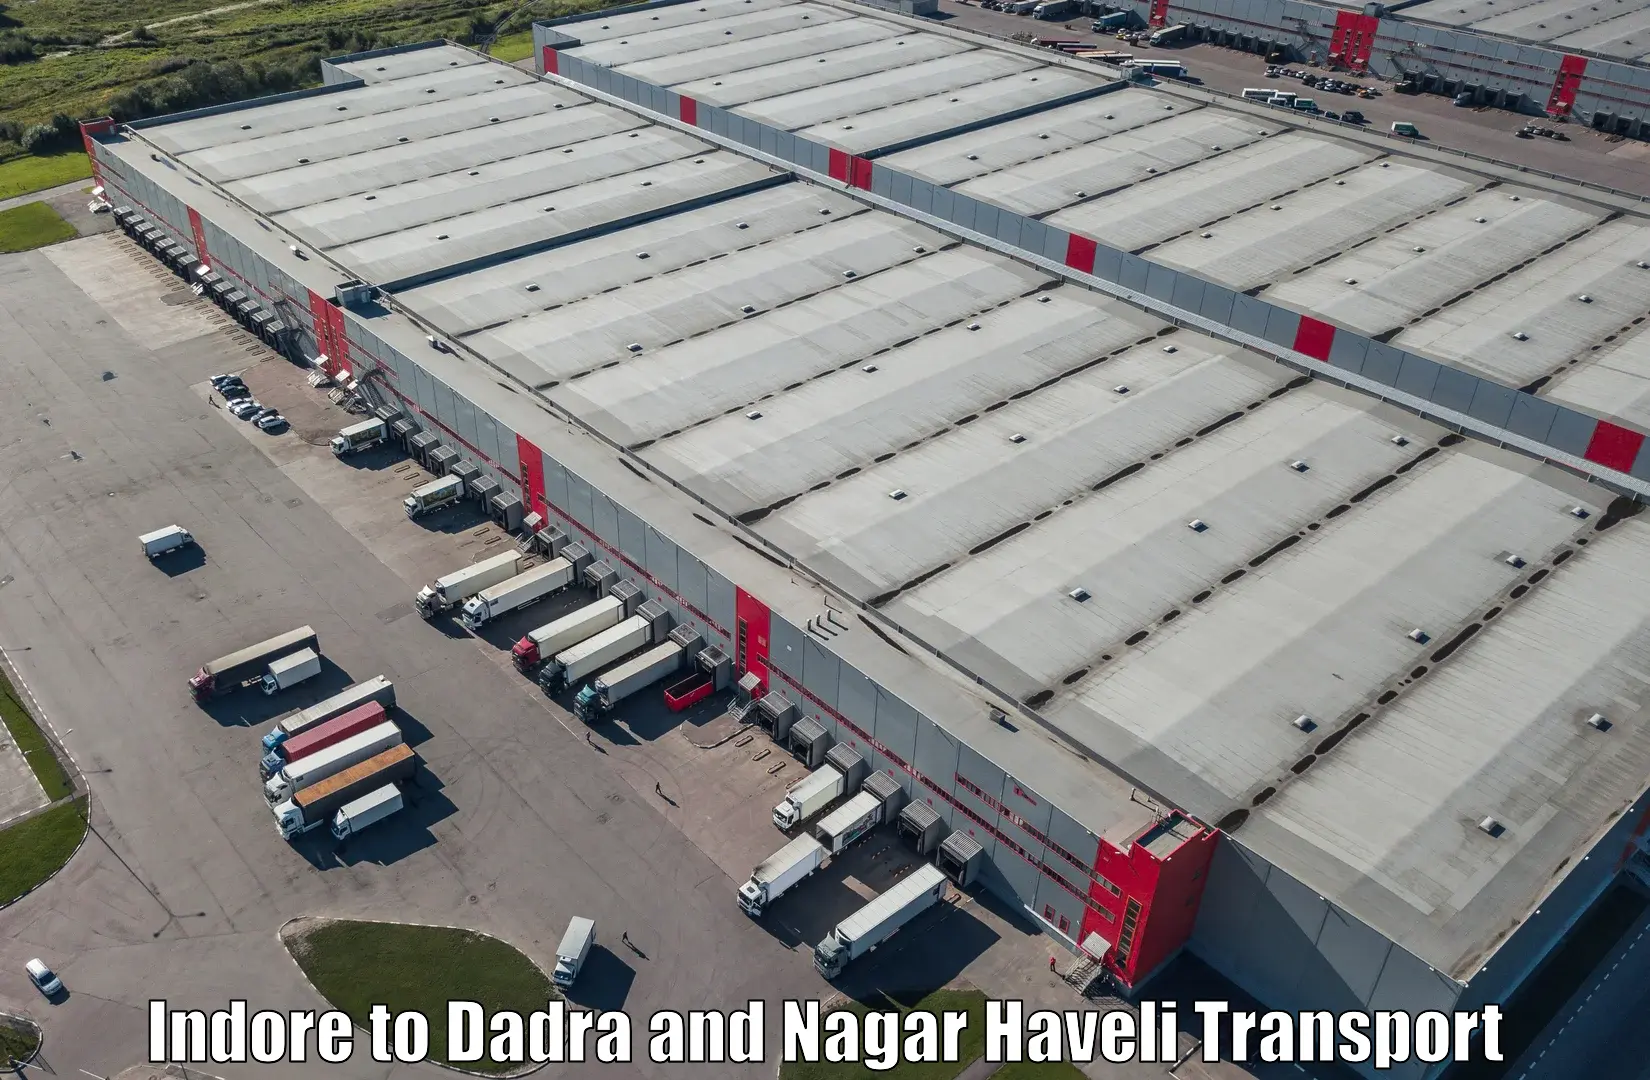 Road transport online services Indore to Dadra and Nagar Haveli